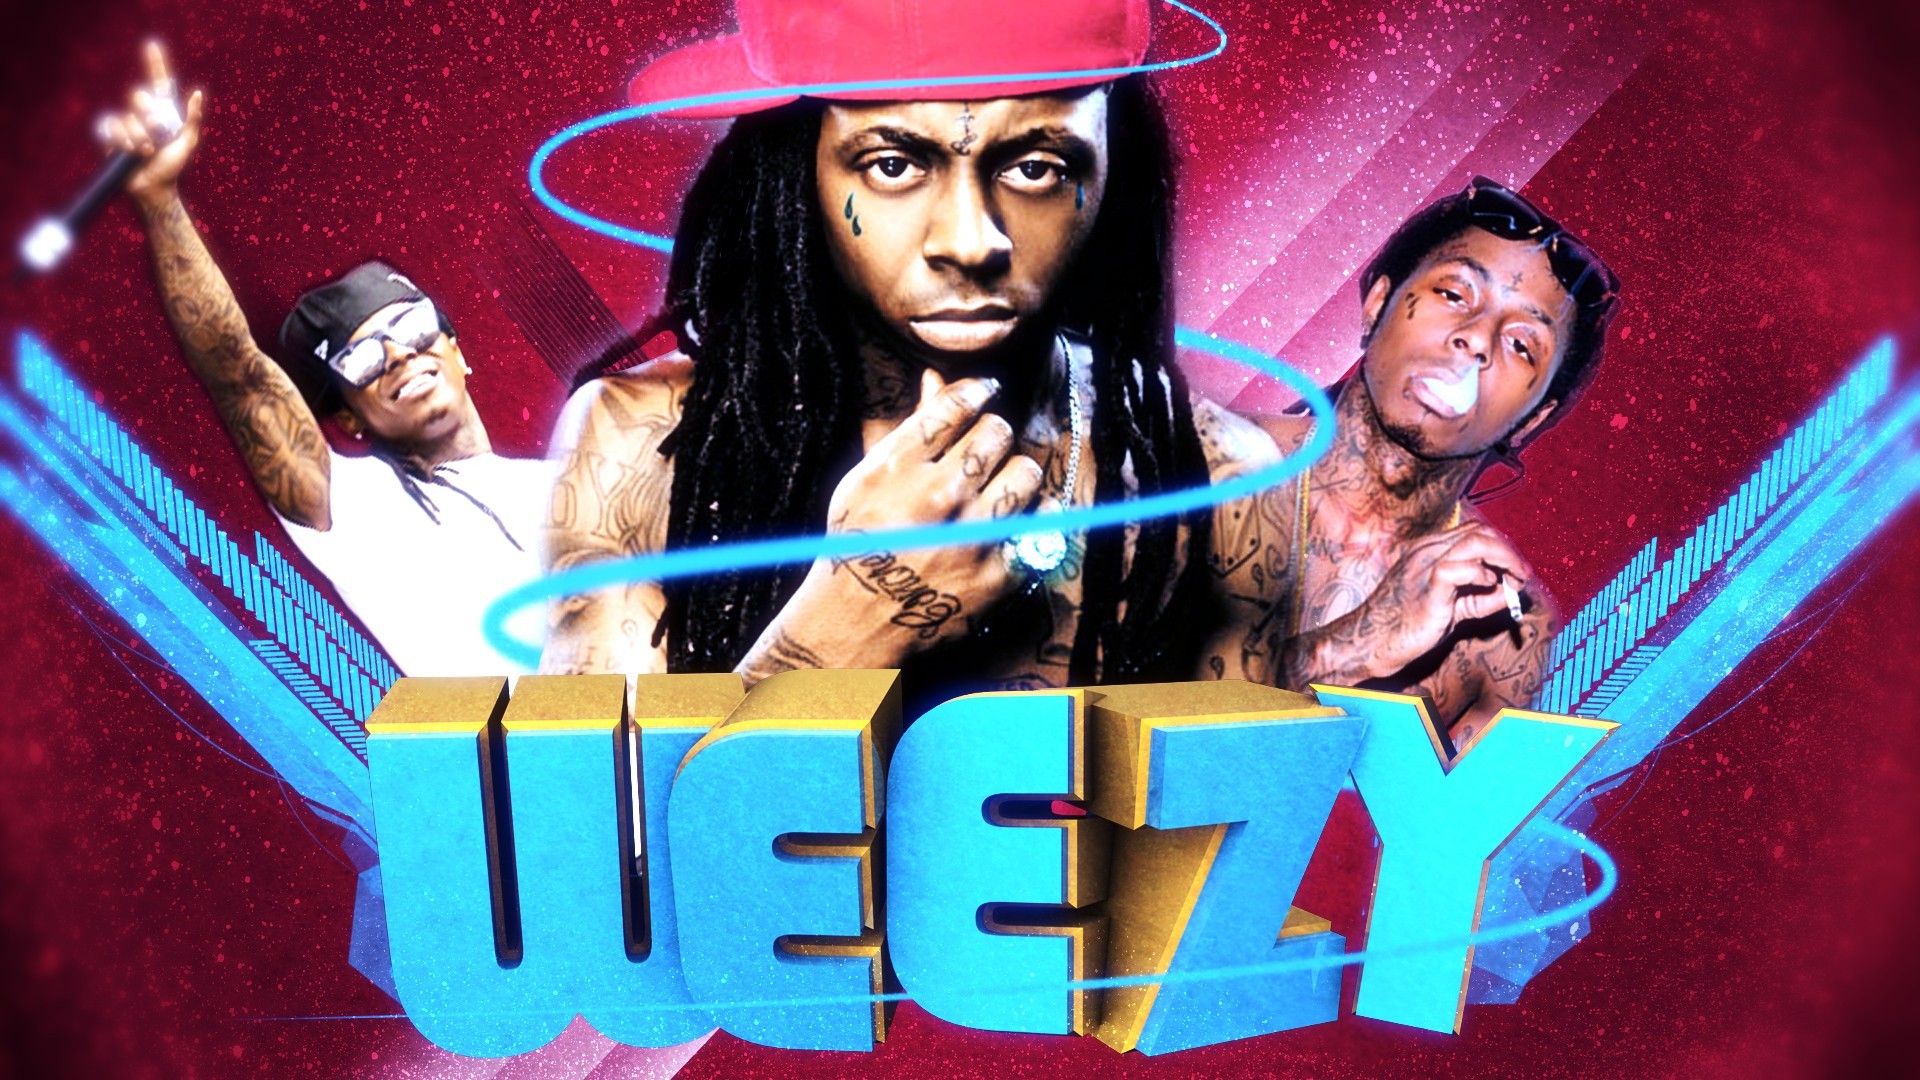 Lil Wayne HD background for your phone iPhone android computer